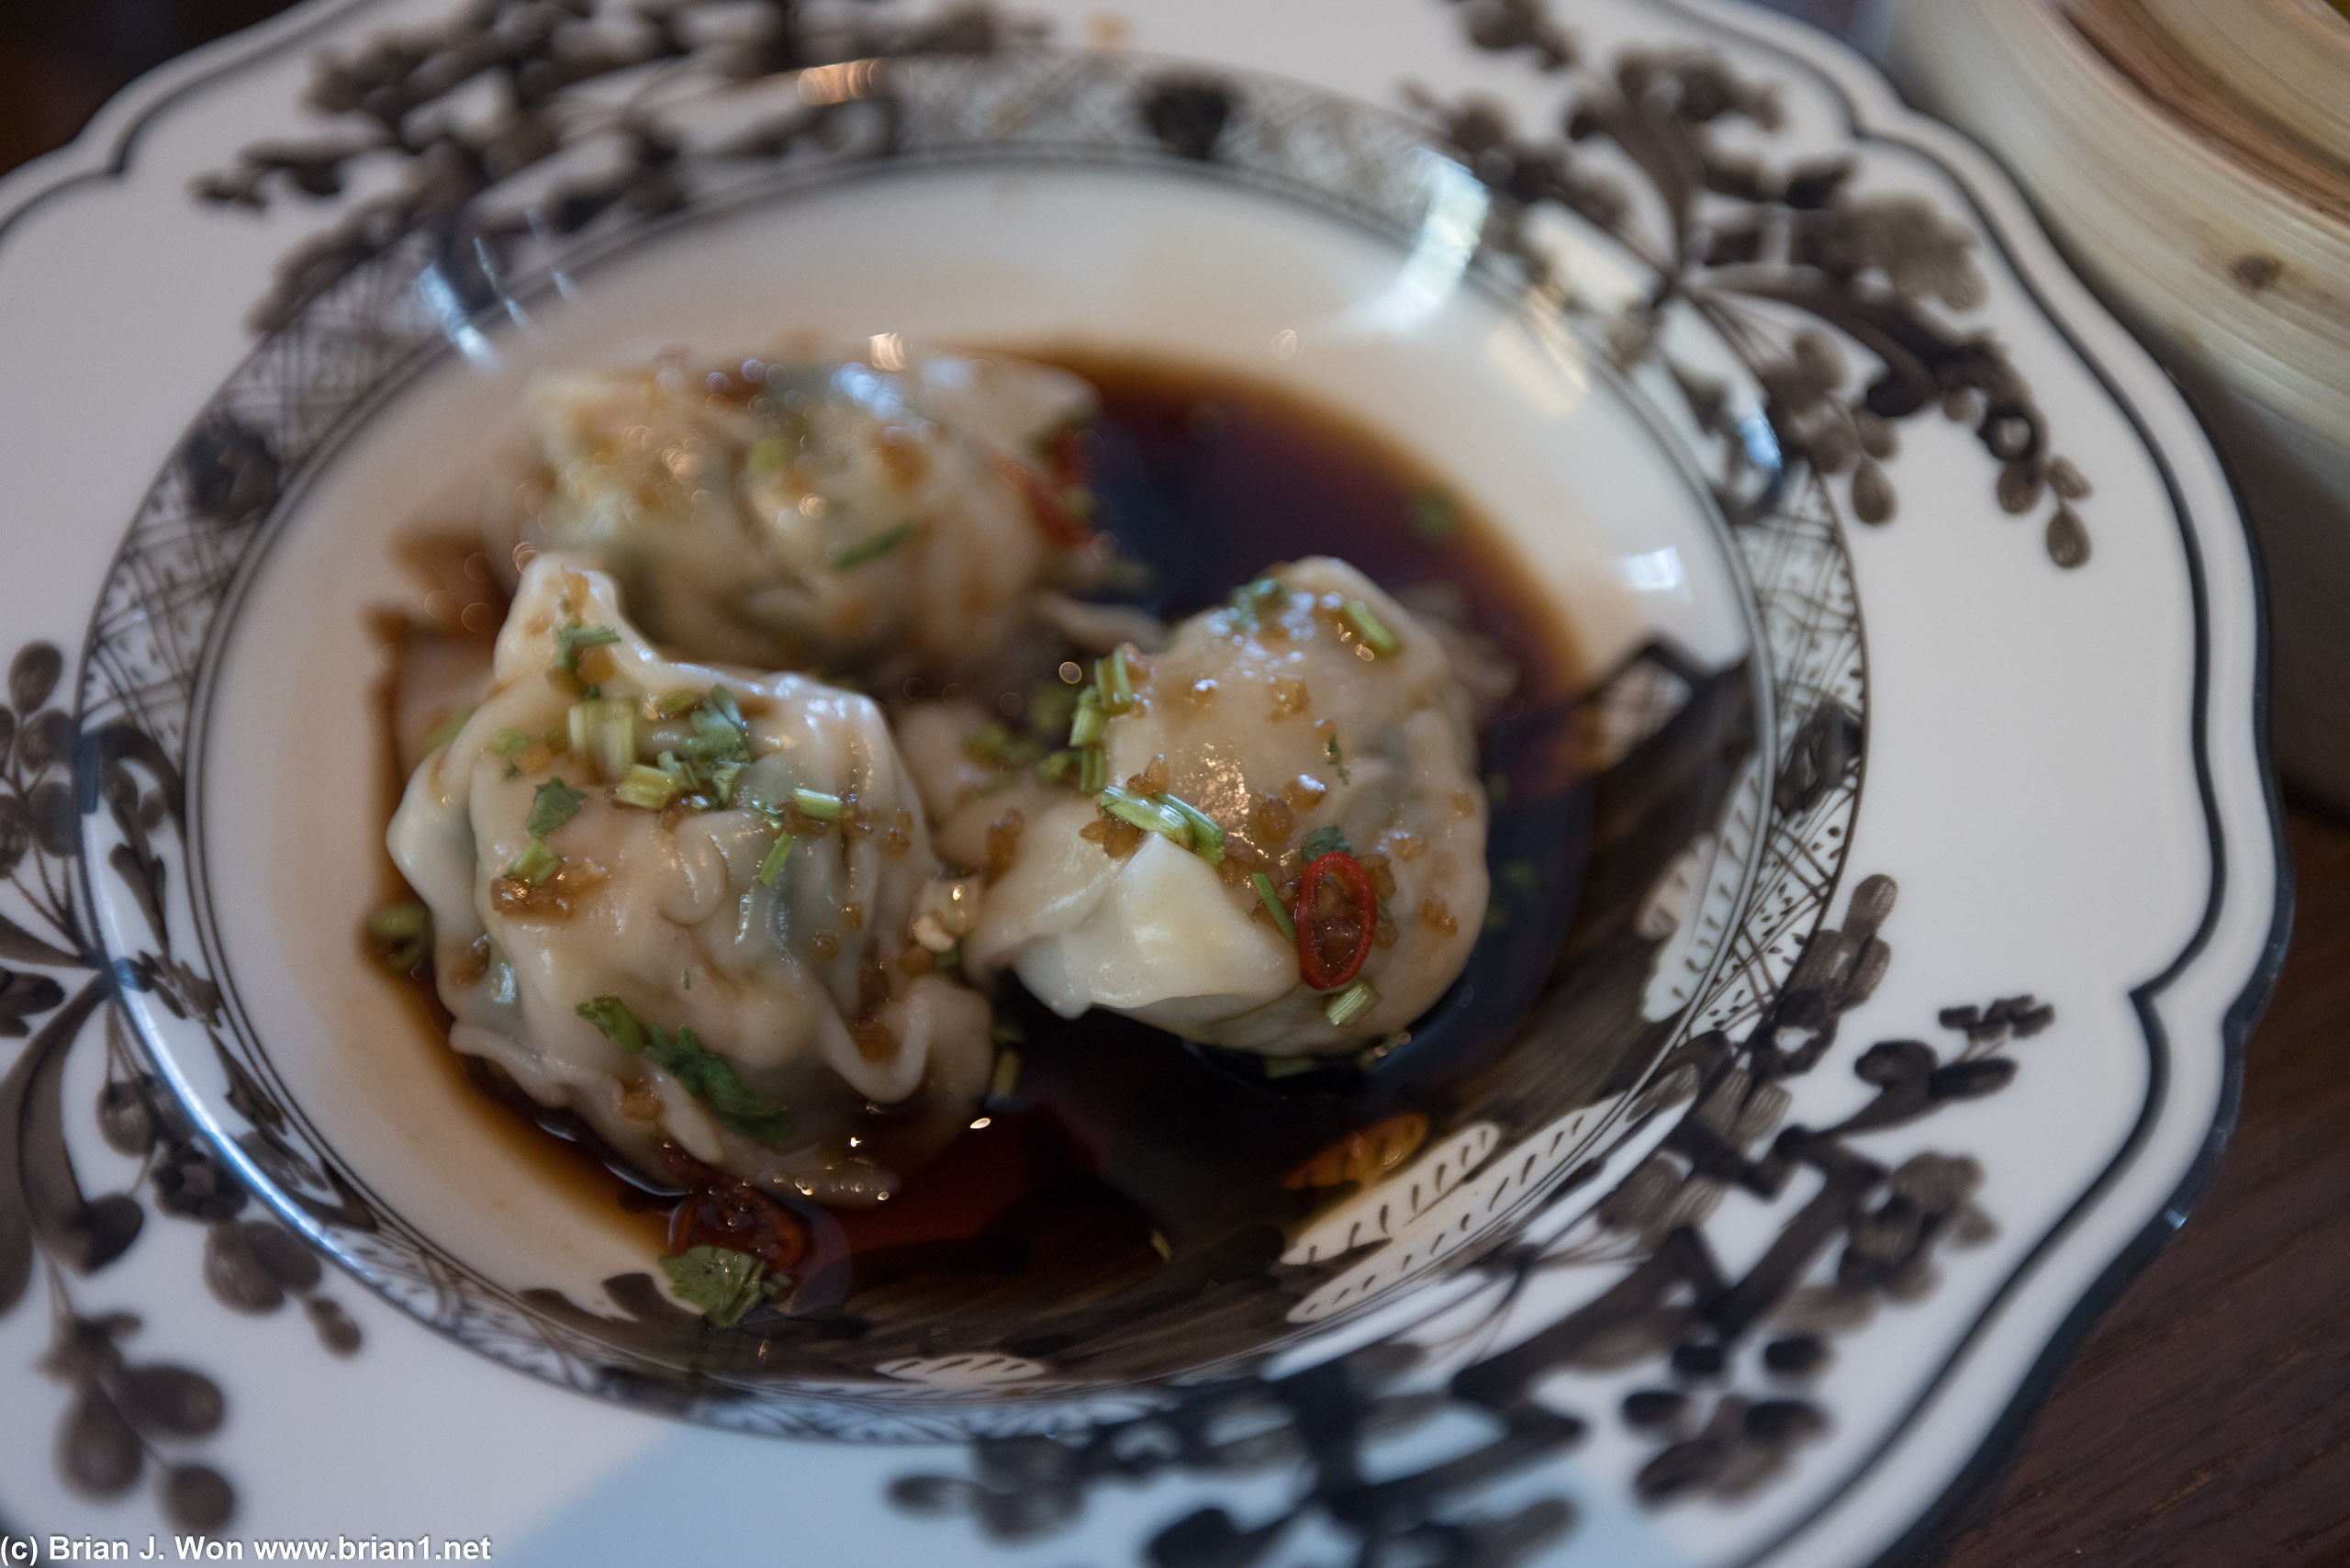 Prawn and chicken dumpling, with chili oil and vinegar. Well-executed but too much vinegar for me.